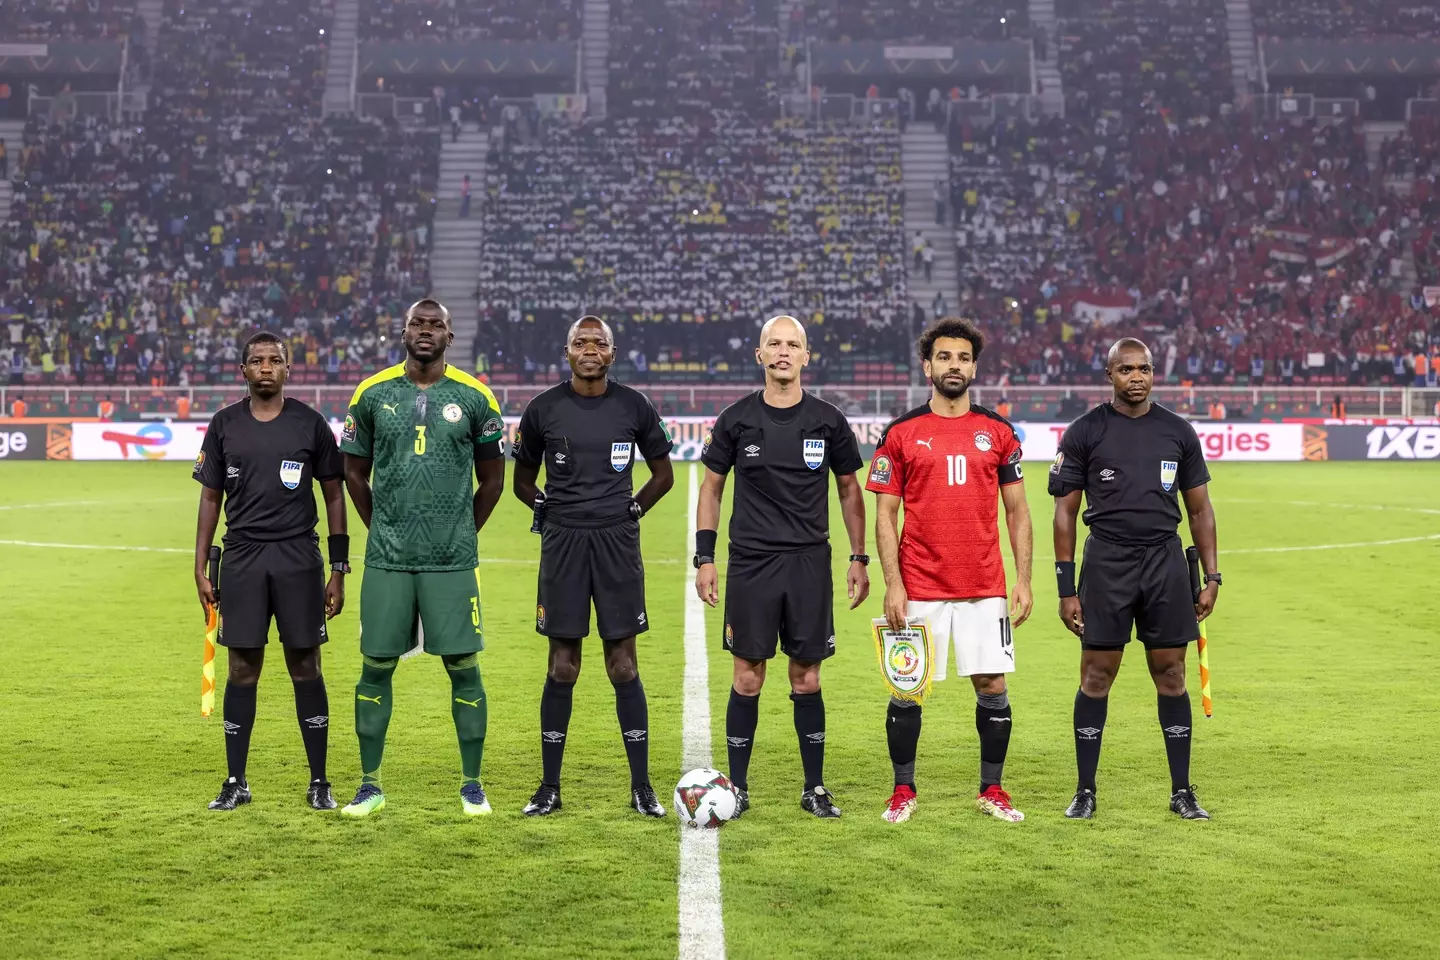 Kalidou Koulibaly of Senegal and Mohamed Salah of Egypt with official referee Victor Gomes pose for photo during the Africa Cup of Nations Final between Senegal and Egypt. Image: Alamy